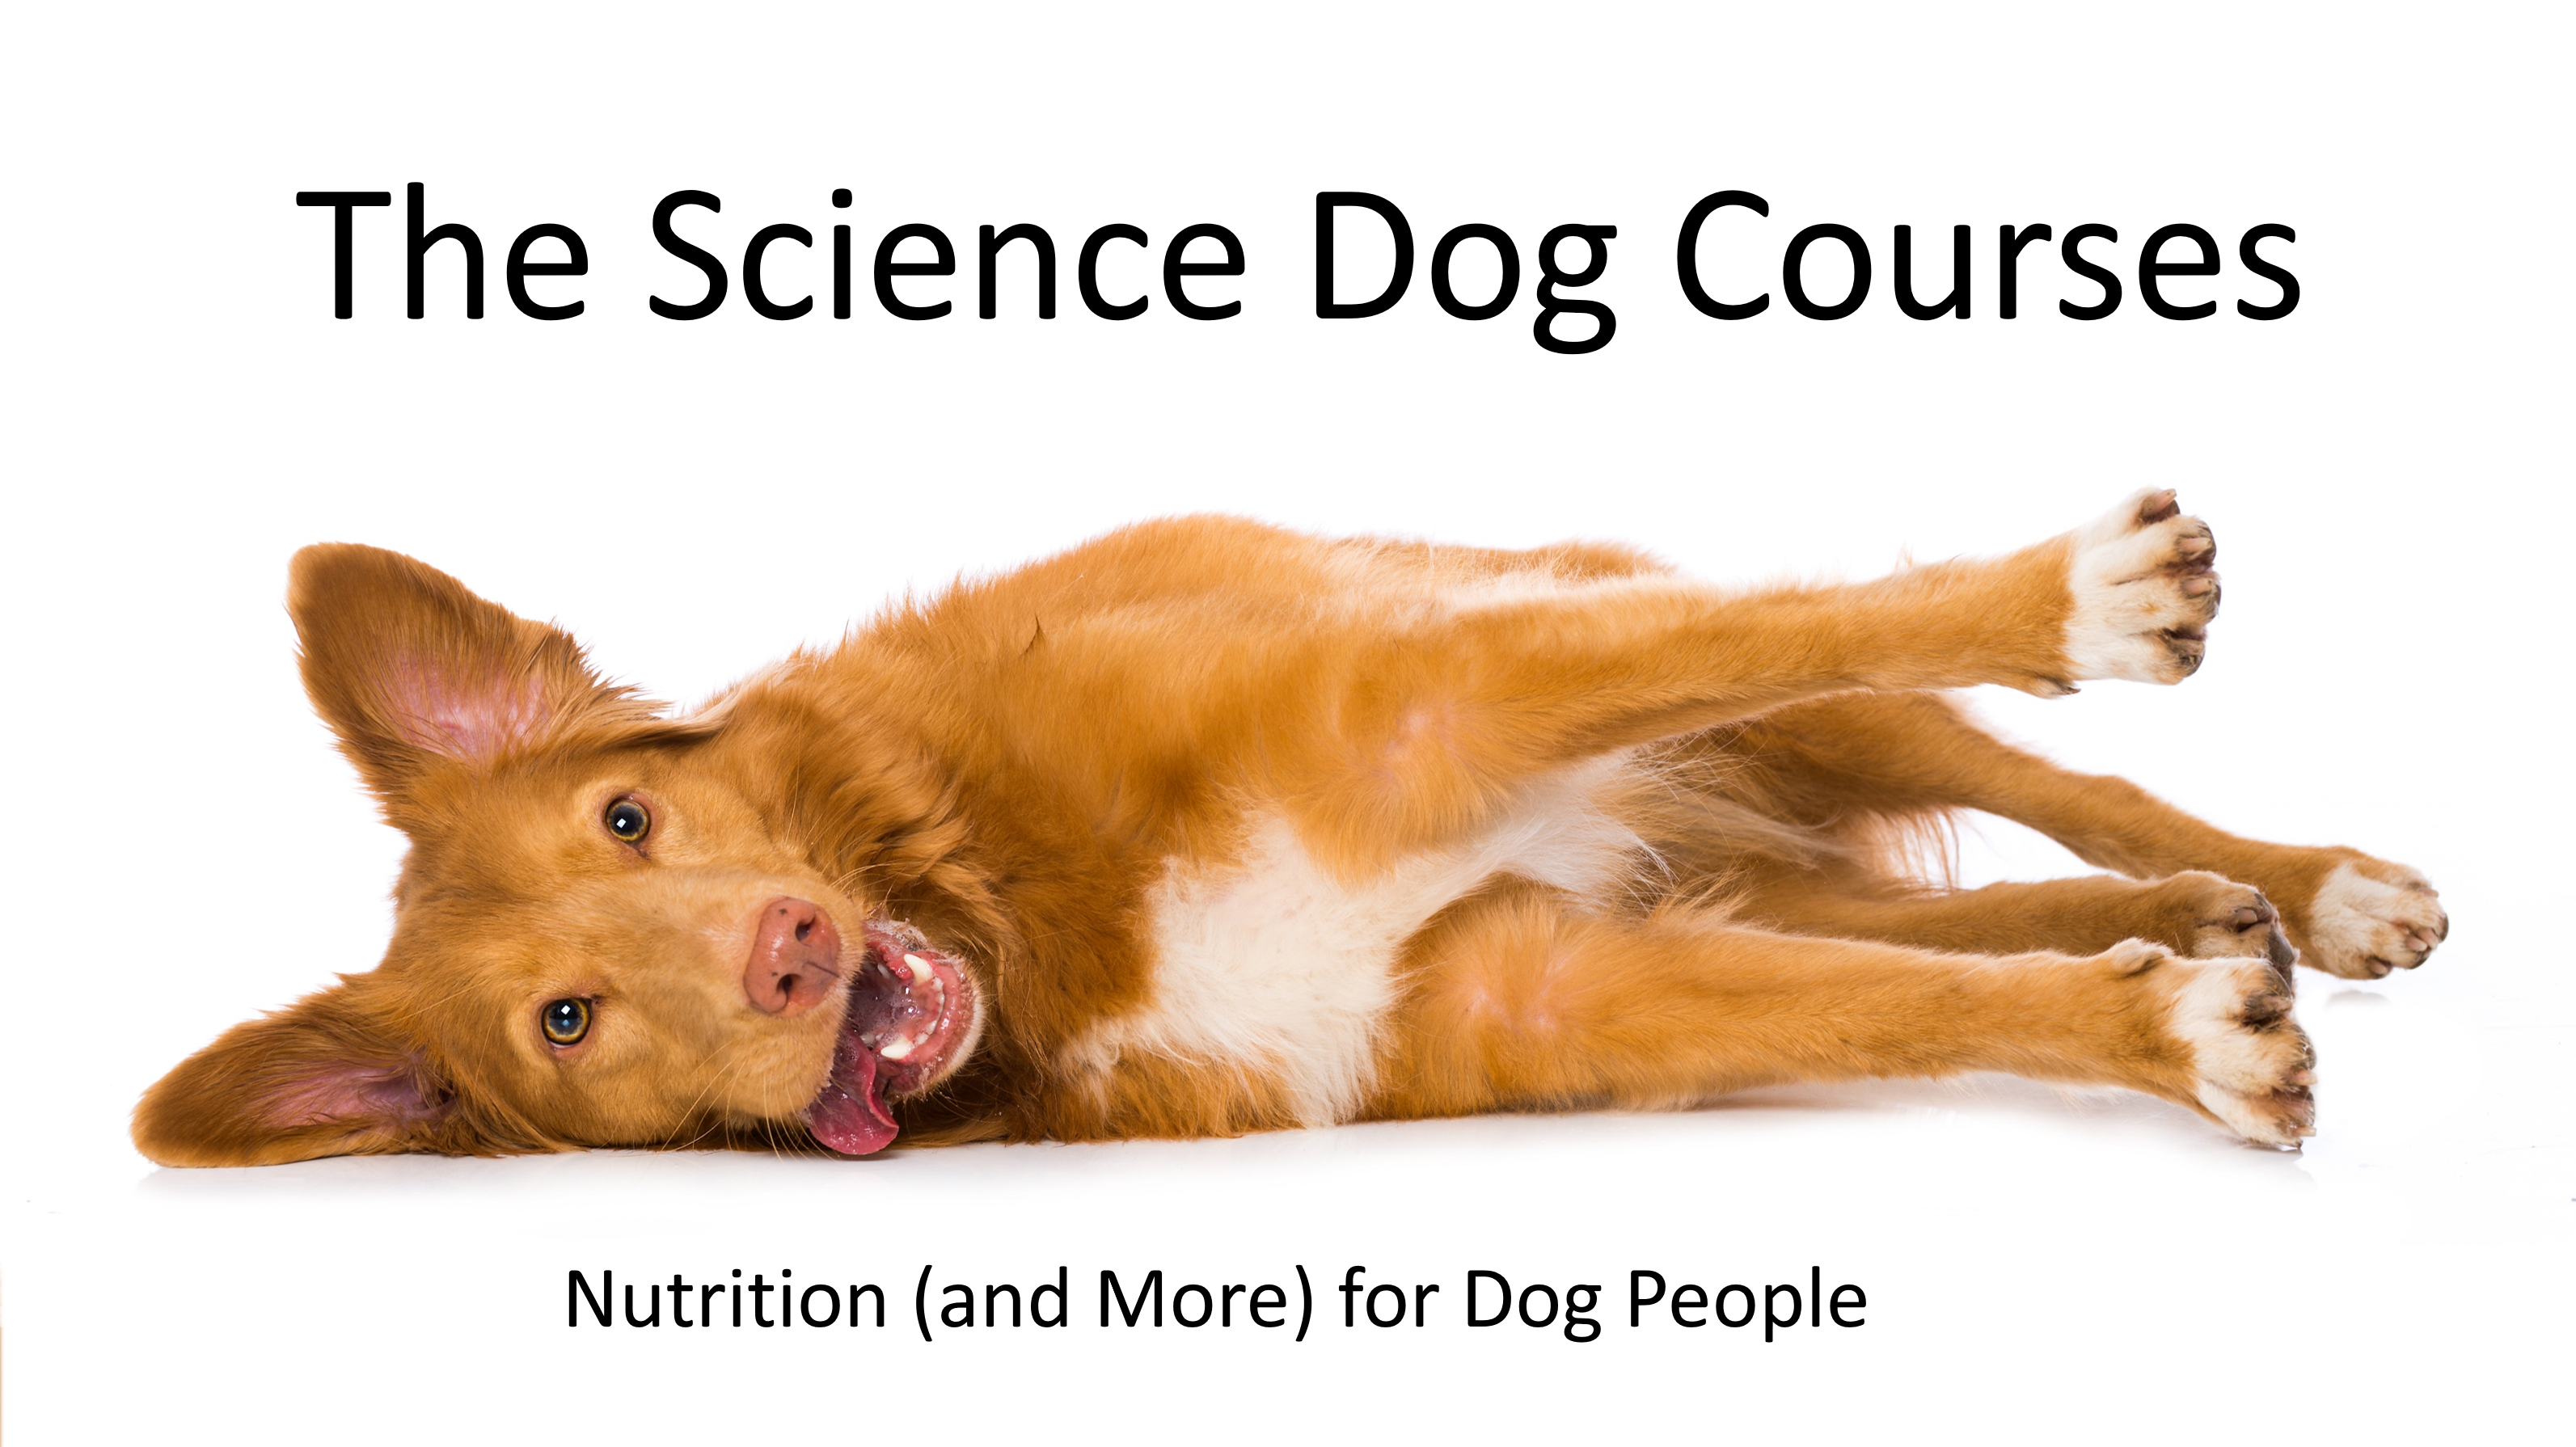 Beware the Straw Man: The Science Dog Explores Dog Training Fact